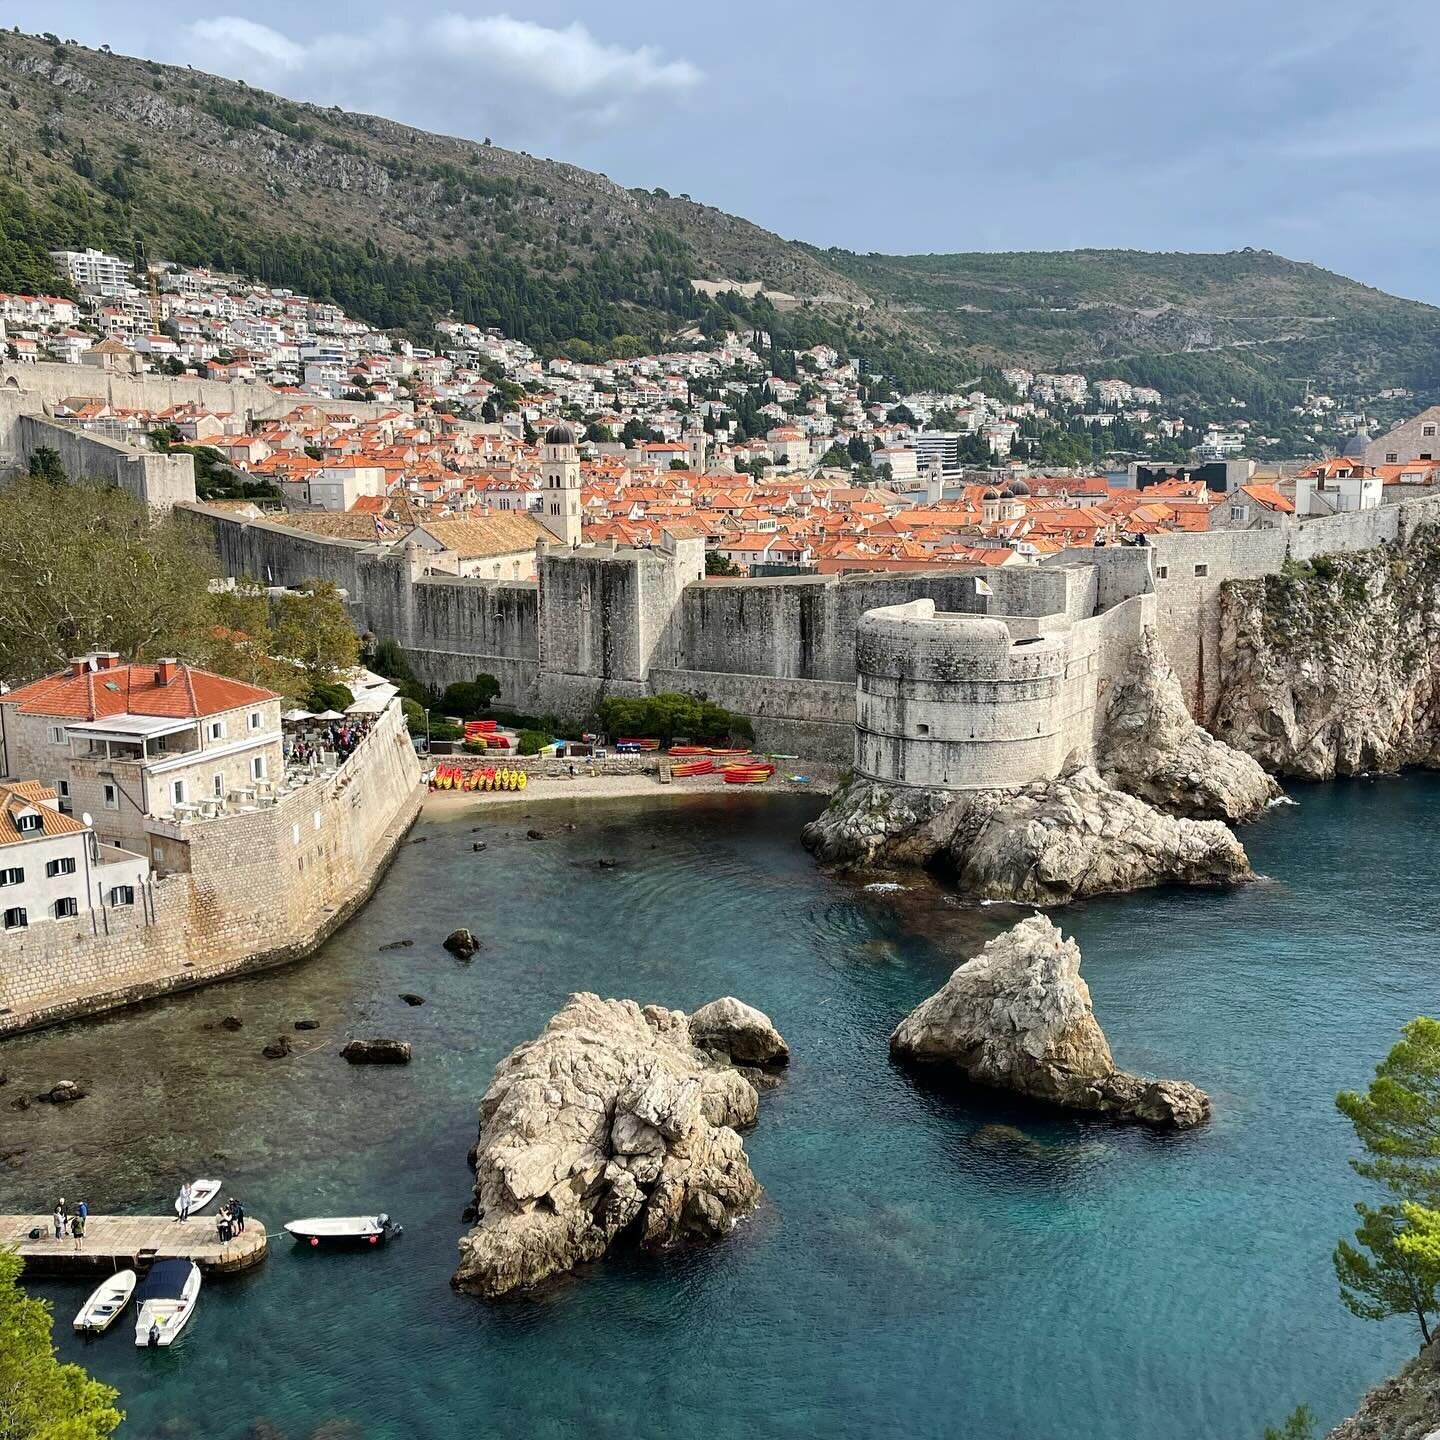 Dubrovnik, Croatia! A nomination as the patron city for Architectural Delight! Its people&rsquo;s stewardship of its city&rsquo;s culture, history, and historic fabric is almost religious in its commitment.
.
Pictures today by @davidandreozzi